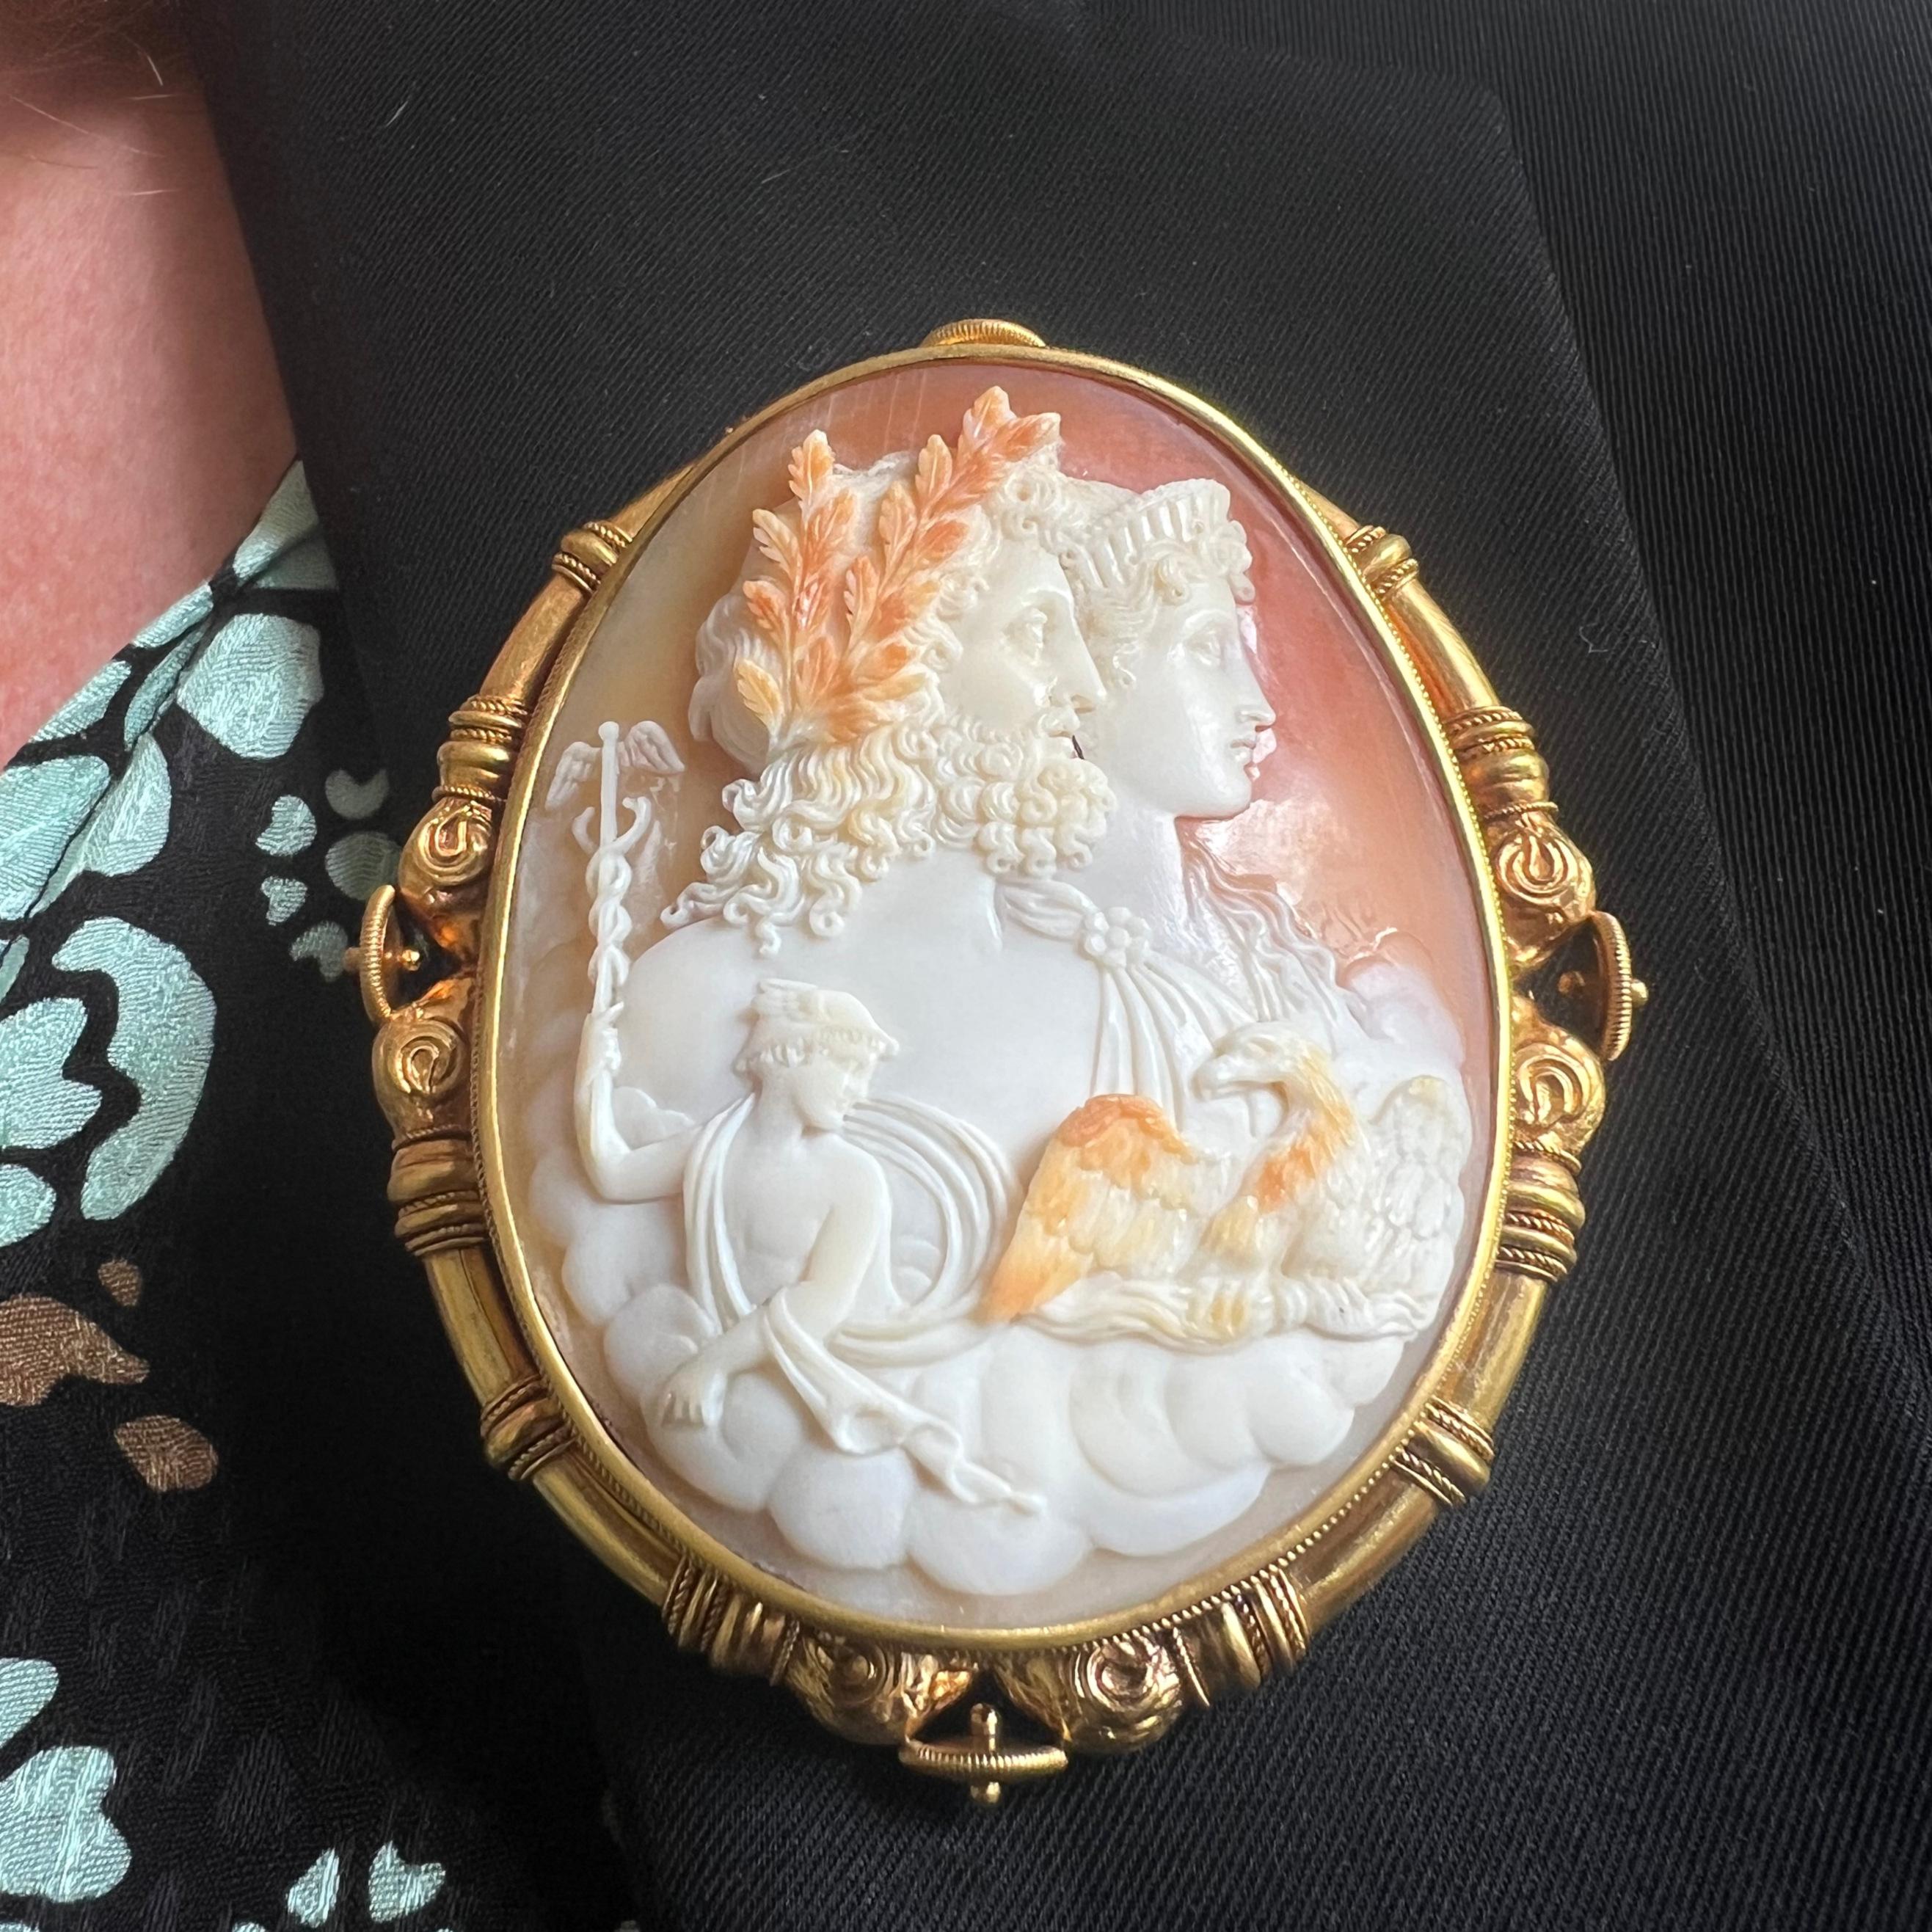 An antique shell cameo and gold brooch, featuring a conch shell cameo, carved with figures representing the Roman god Jupiter or the Greek god Zeus, with his eagle symbol and the Roman goddess Juno or the Greek goddess Hera, with a smaller carving